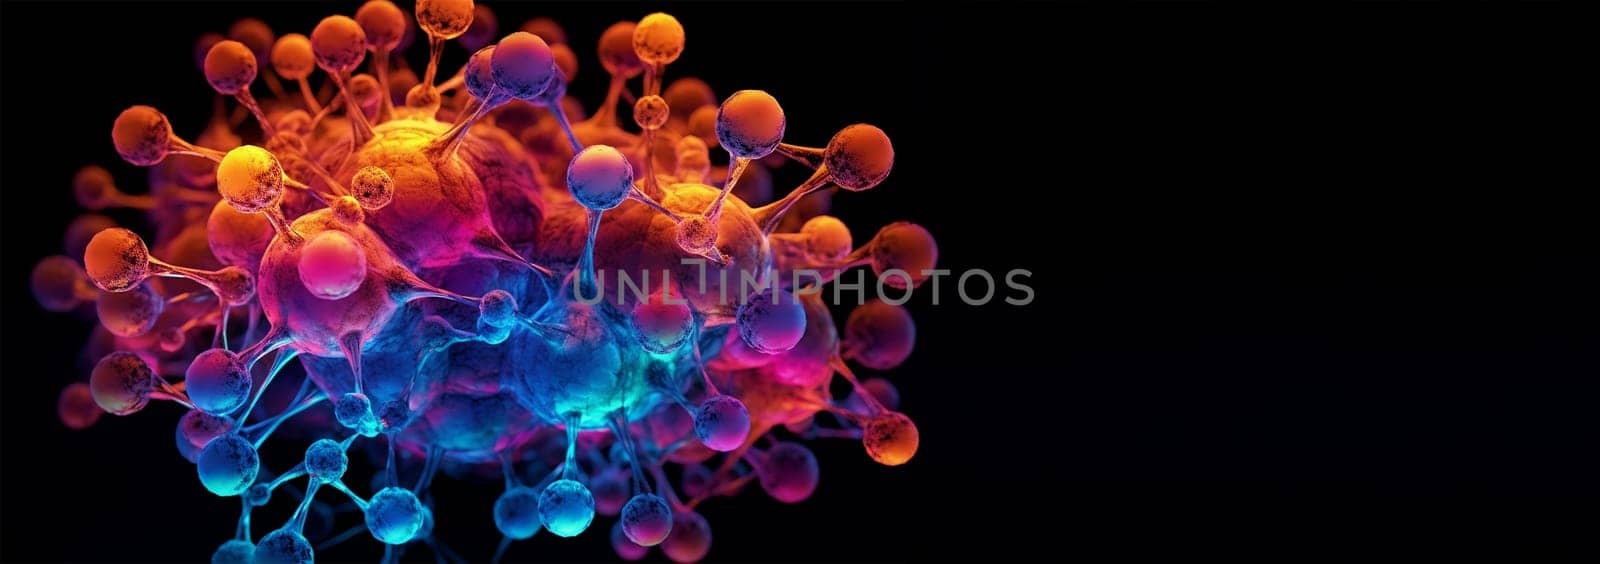 Neon light molecule black background. Alternative hydrogen energy futuristic concept with glowing low polygonal hydrogen molecules and place for text on dark black background. Modern abstract wire frame mesh design illustration. DNA Space for text